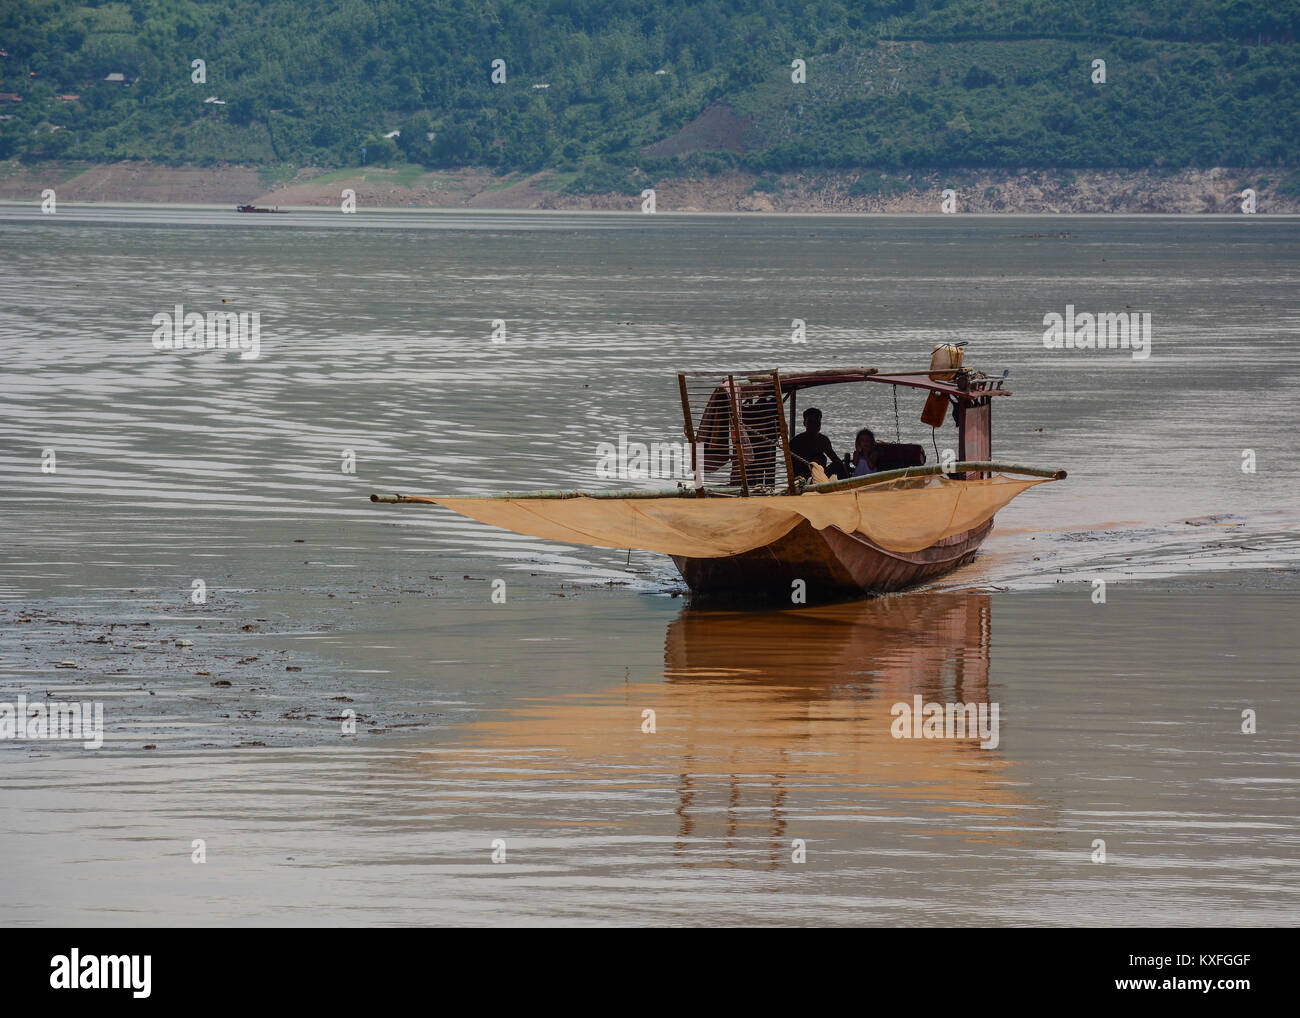 Hoa Binh, Vietnam - May 27, 2016. A wooden boat running on Da River in Hoa Binh, Northern Vietnam. The Da (Black) River is the most important tributar Stock Photo